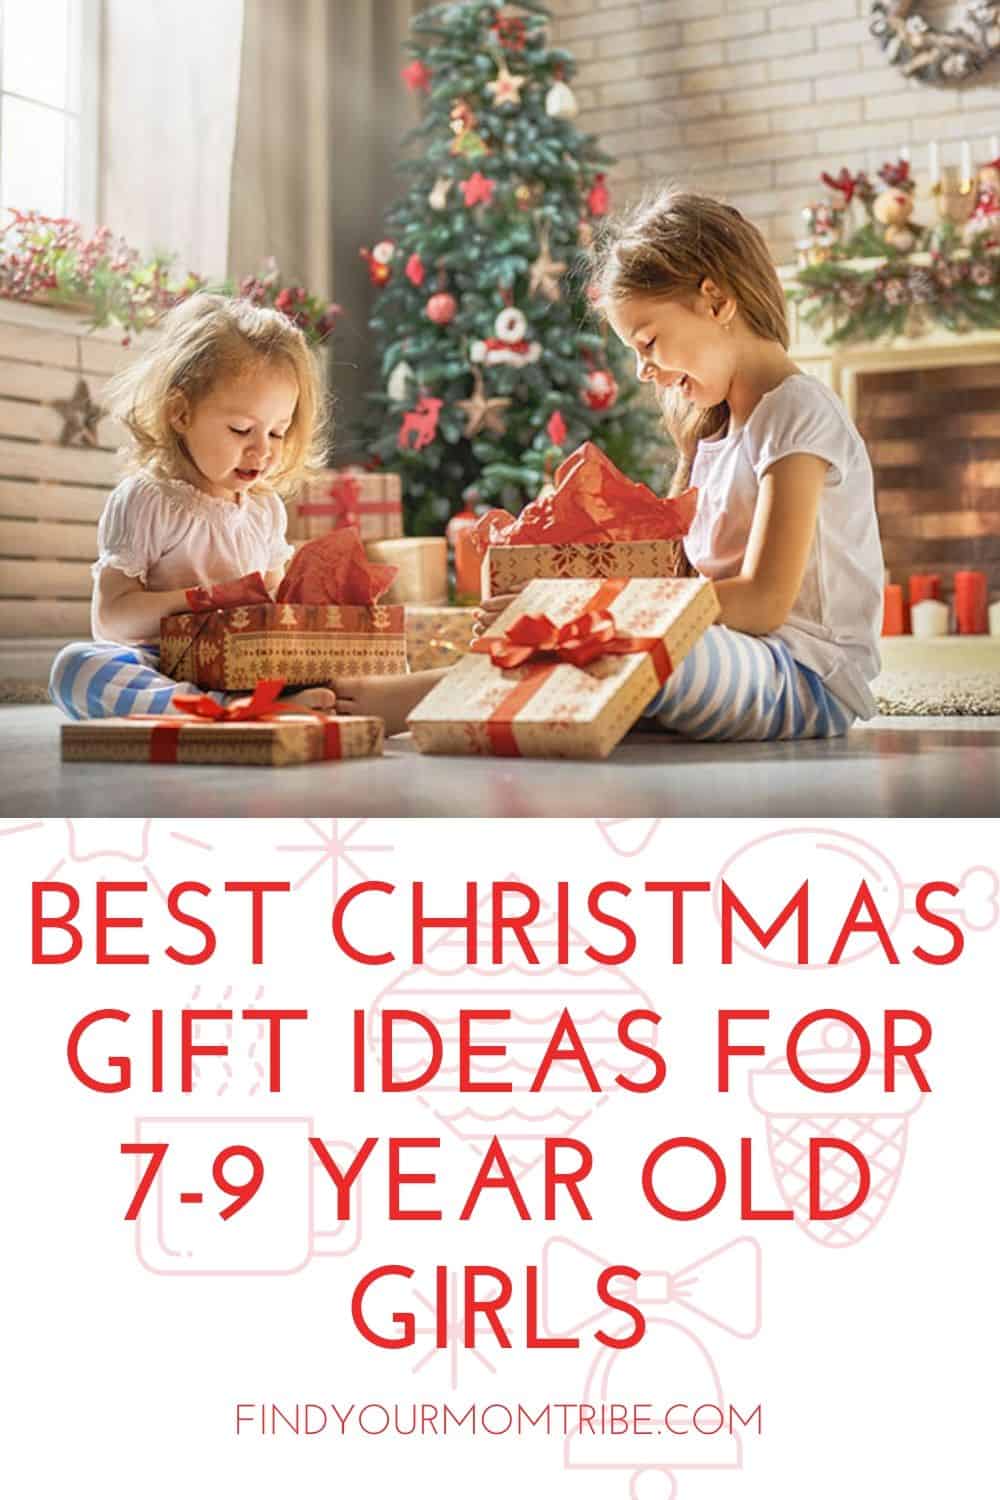 Best Christmas Gift Ideas for 7-9 Year Old Girls